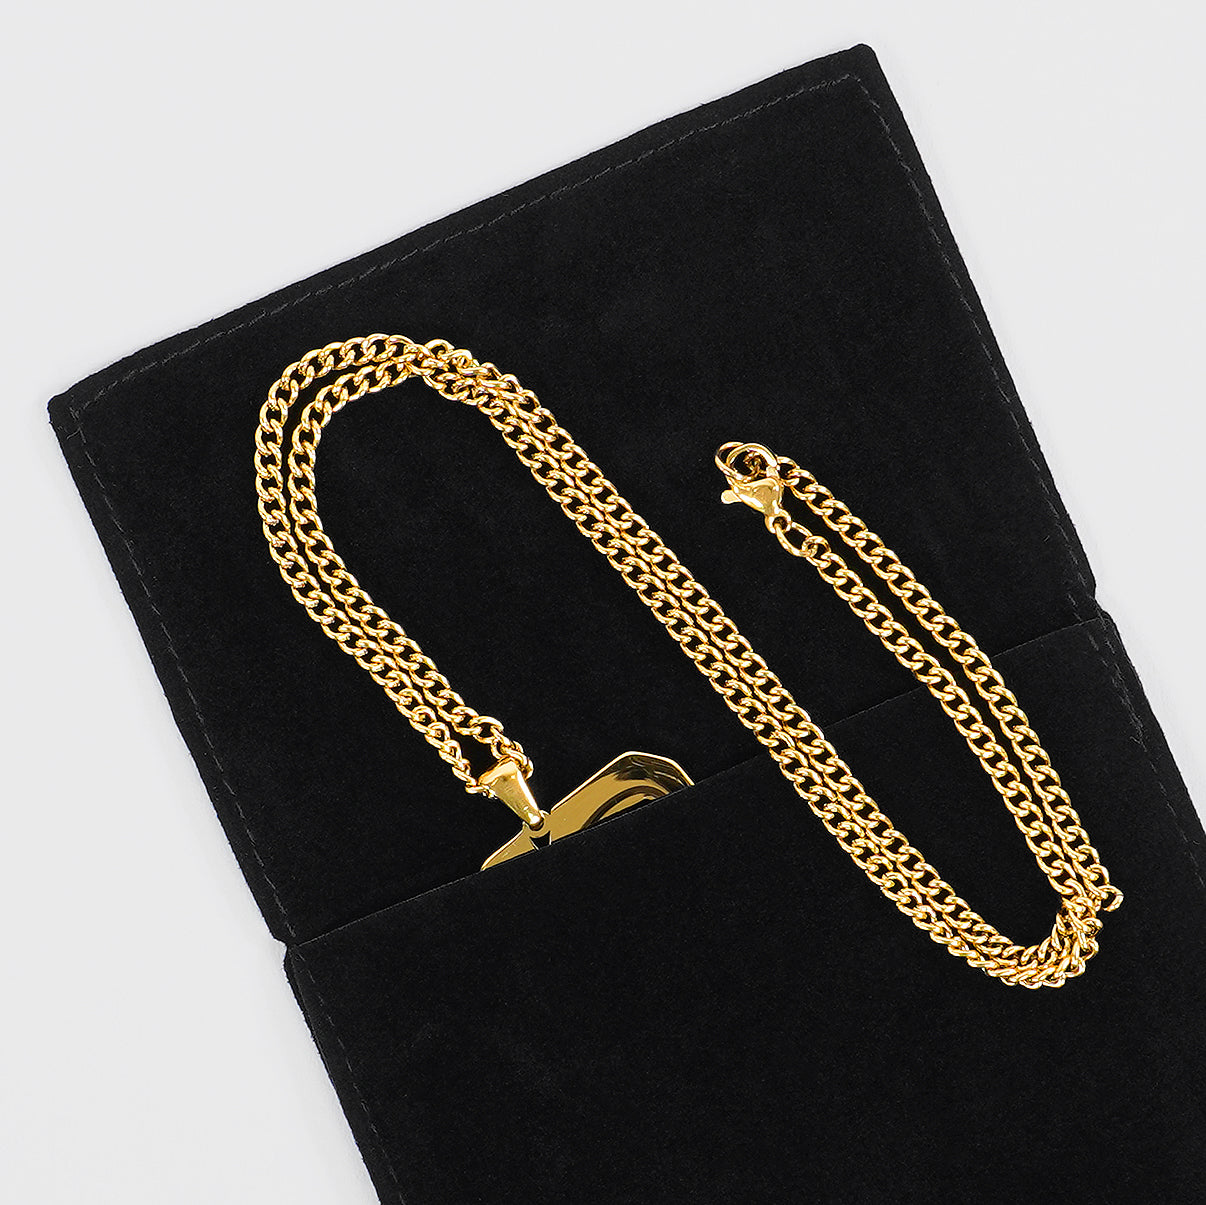 99 Number Pendant with Chain Necklace - Gold Plated Stainless Steel